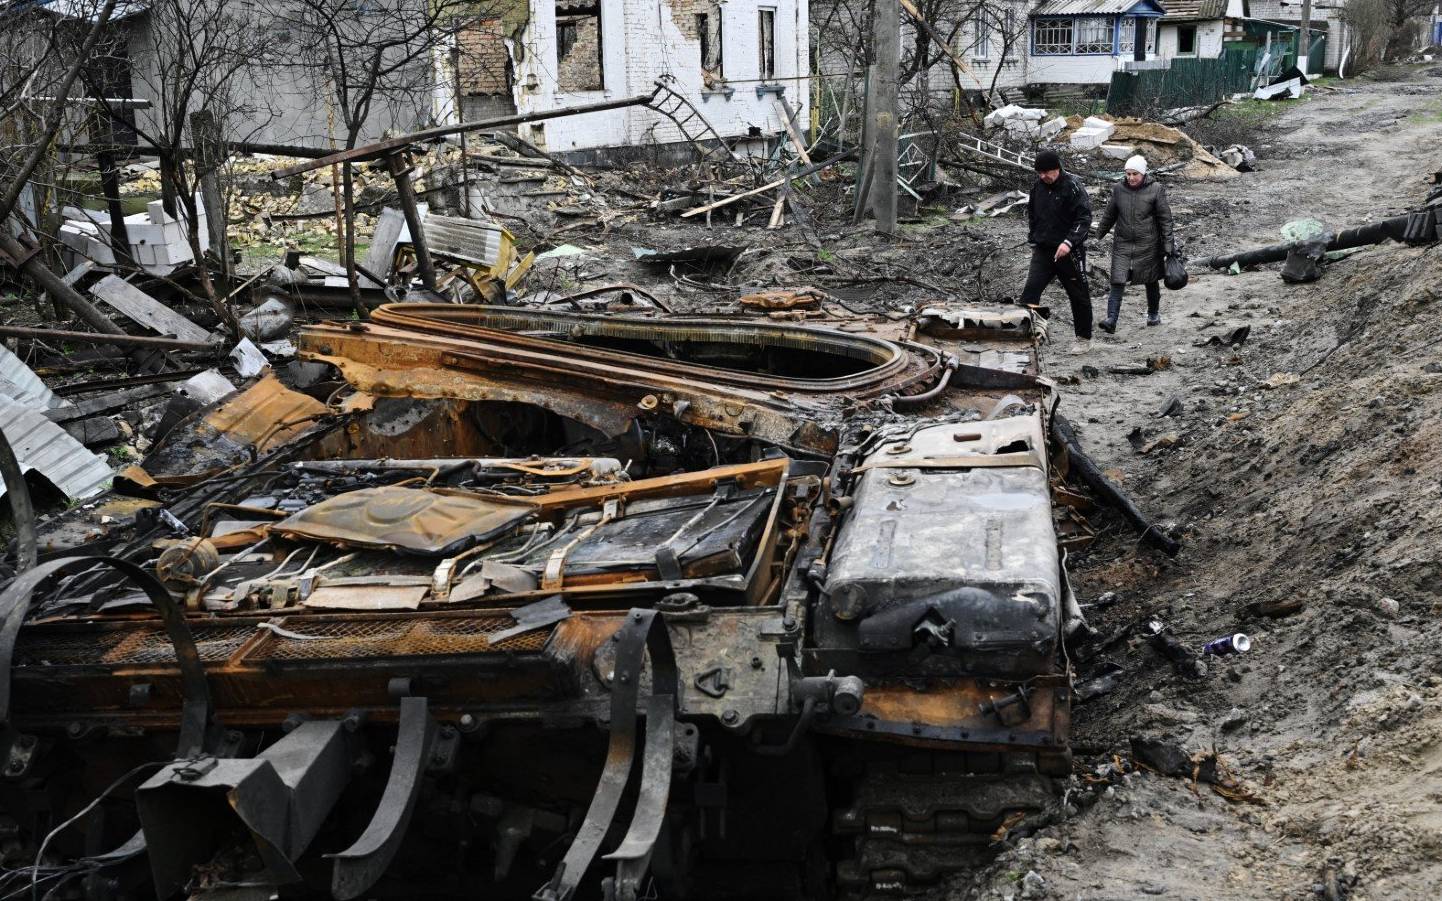 Local residents walk amid debris of a charred Russian tank next to destroyed houses in the village of Zalissya, northeast of Kyiv, on April 19, 2022, during the Russian invasion of Ukraine. (Photo by Genya SAVILOV / AFP)